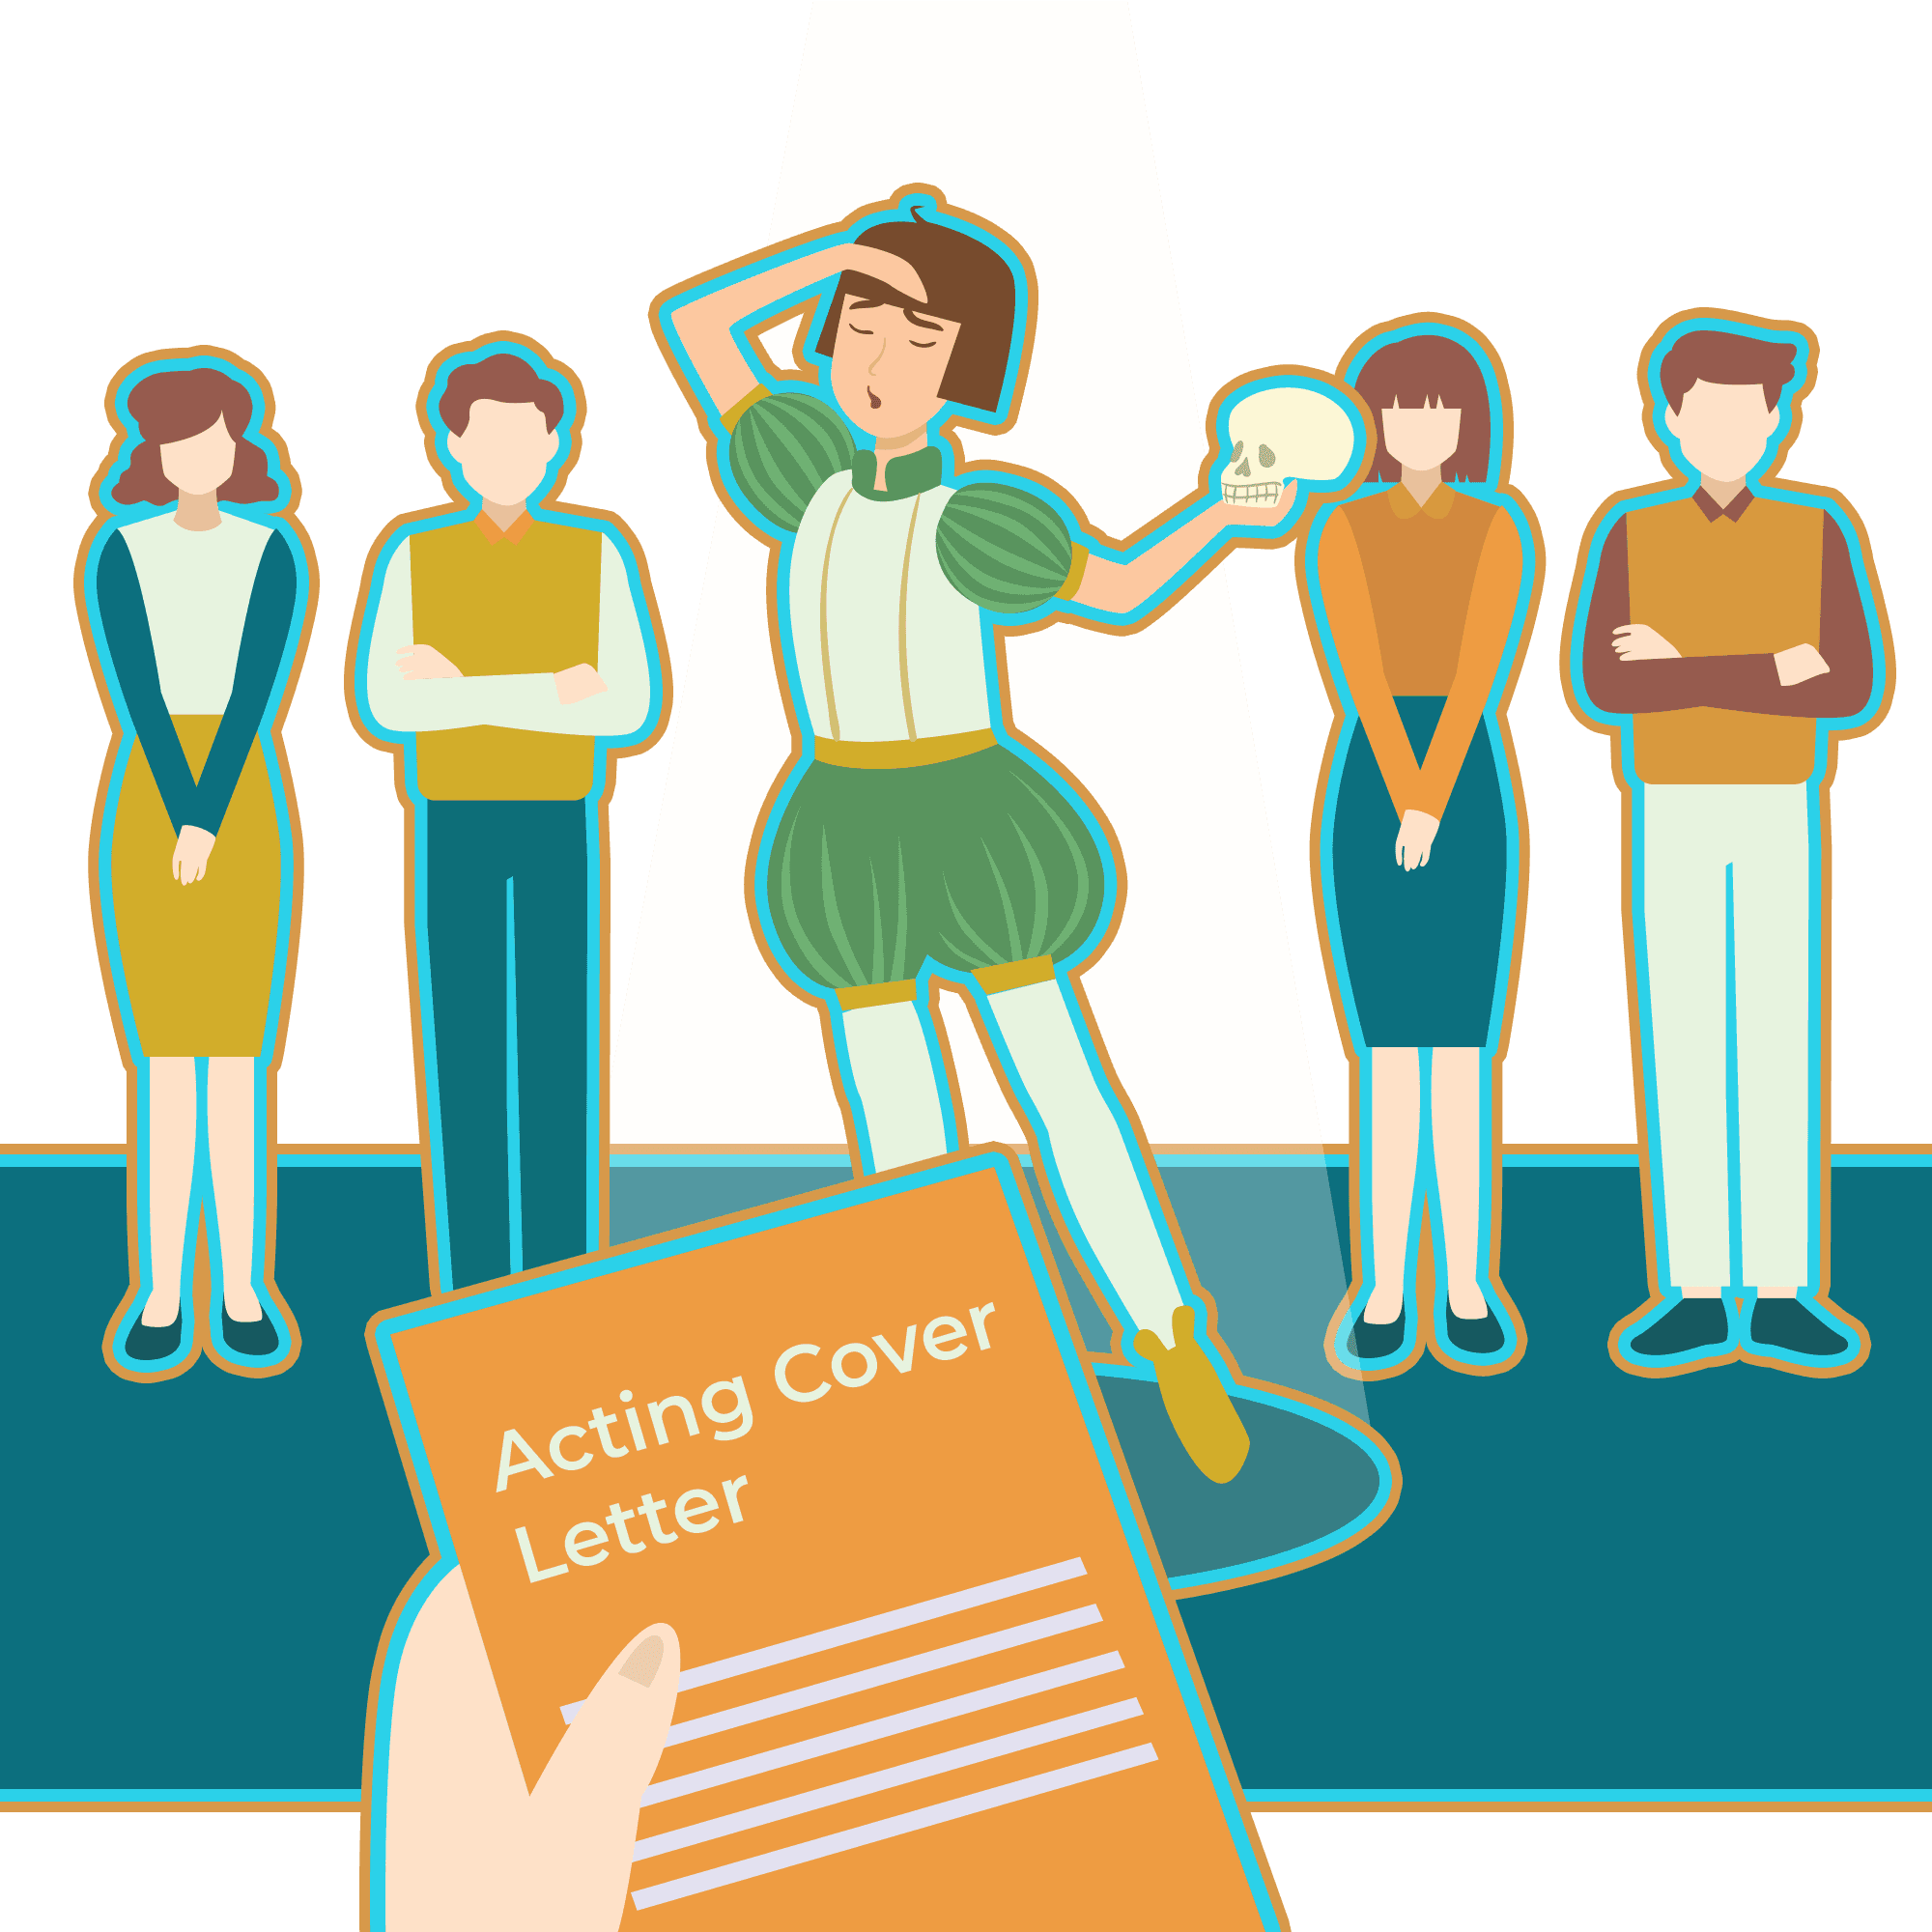 Acting Cover Letter: Examples, Templates, Writing Tips